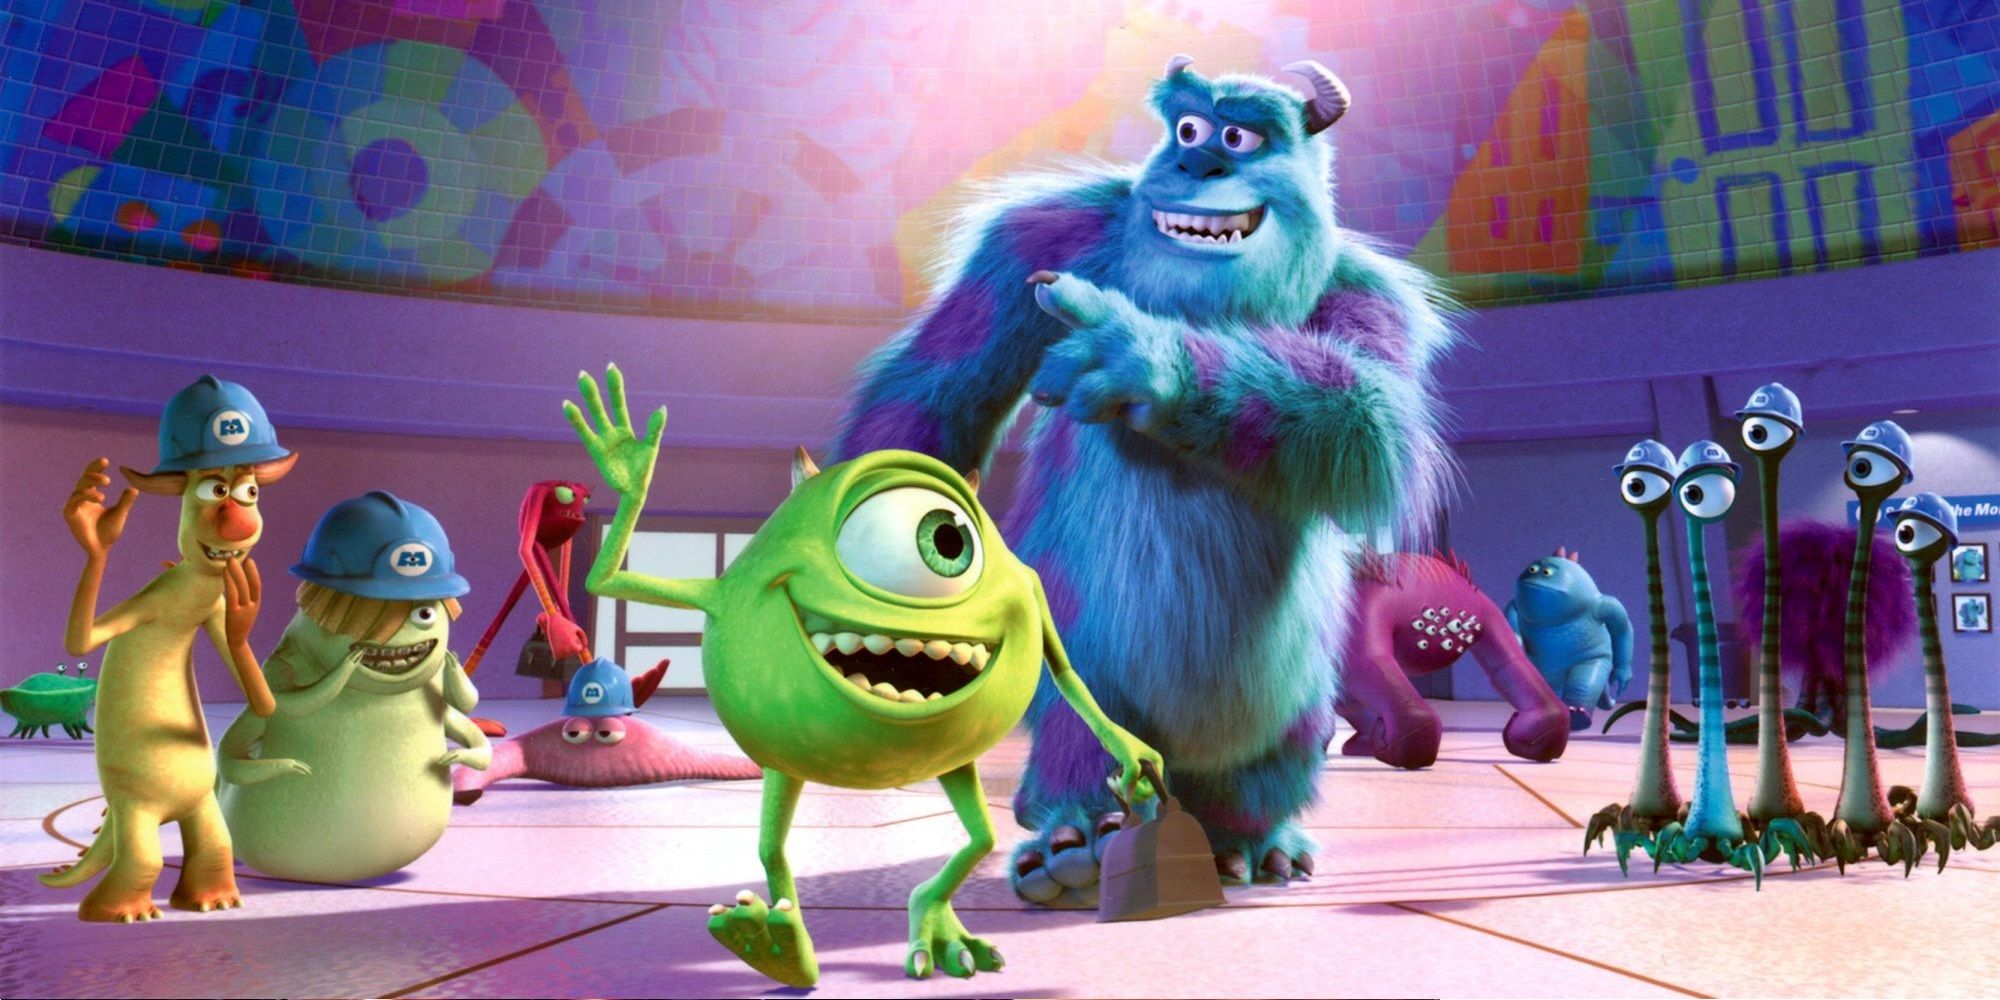 Mike and Sulley surrounded by other monster workers in Monsters Inc